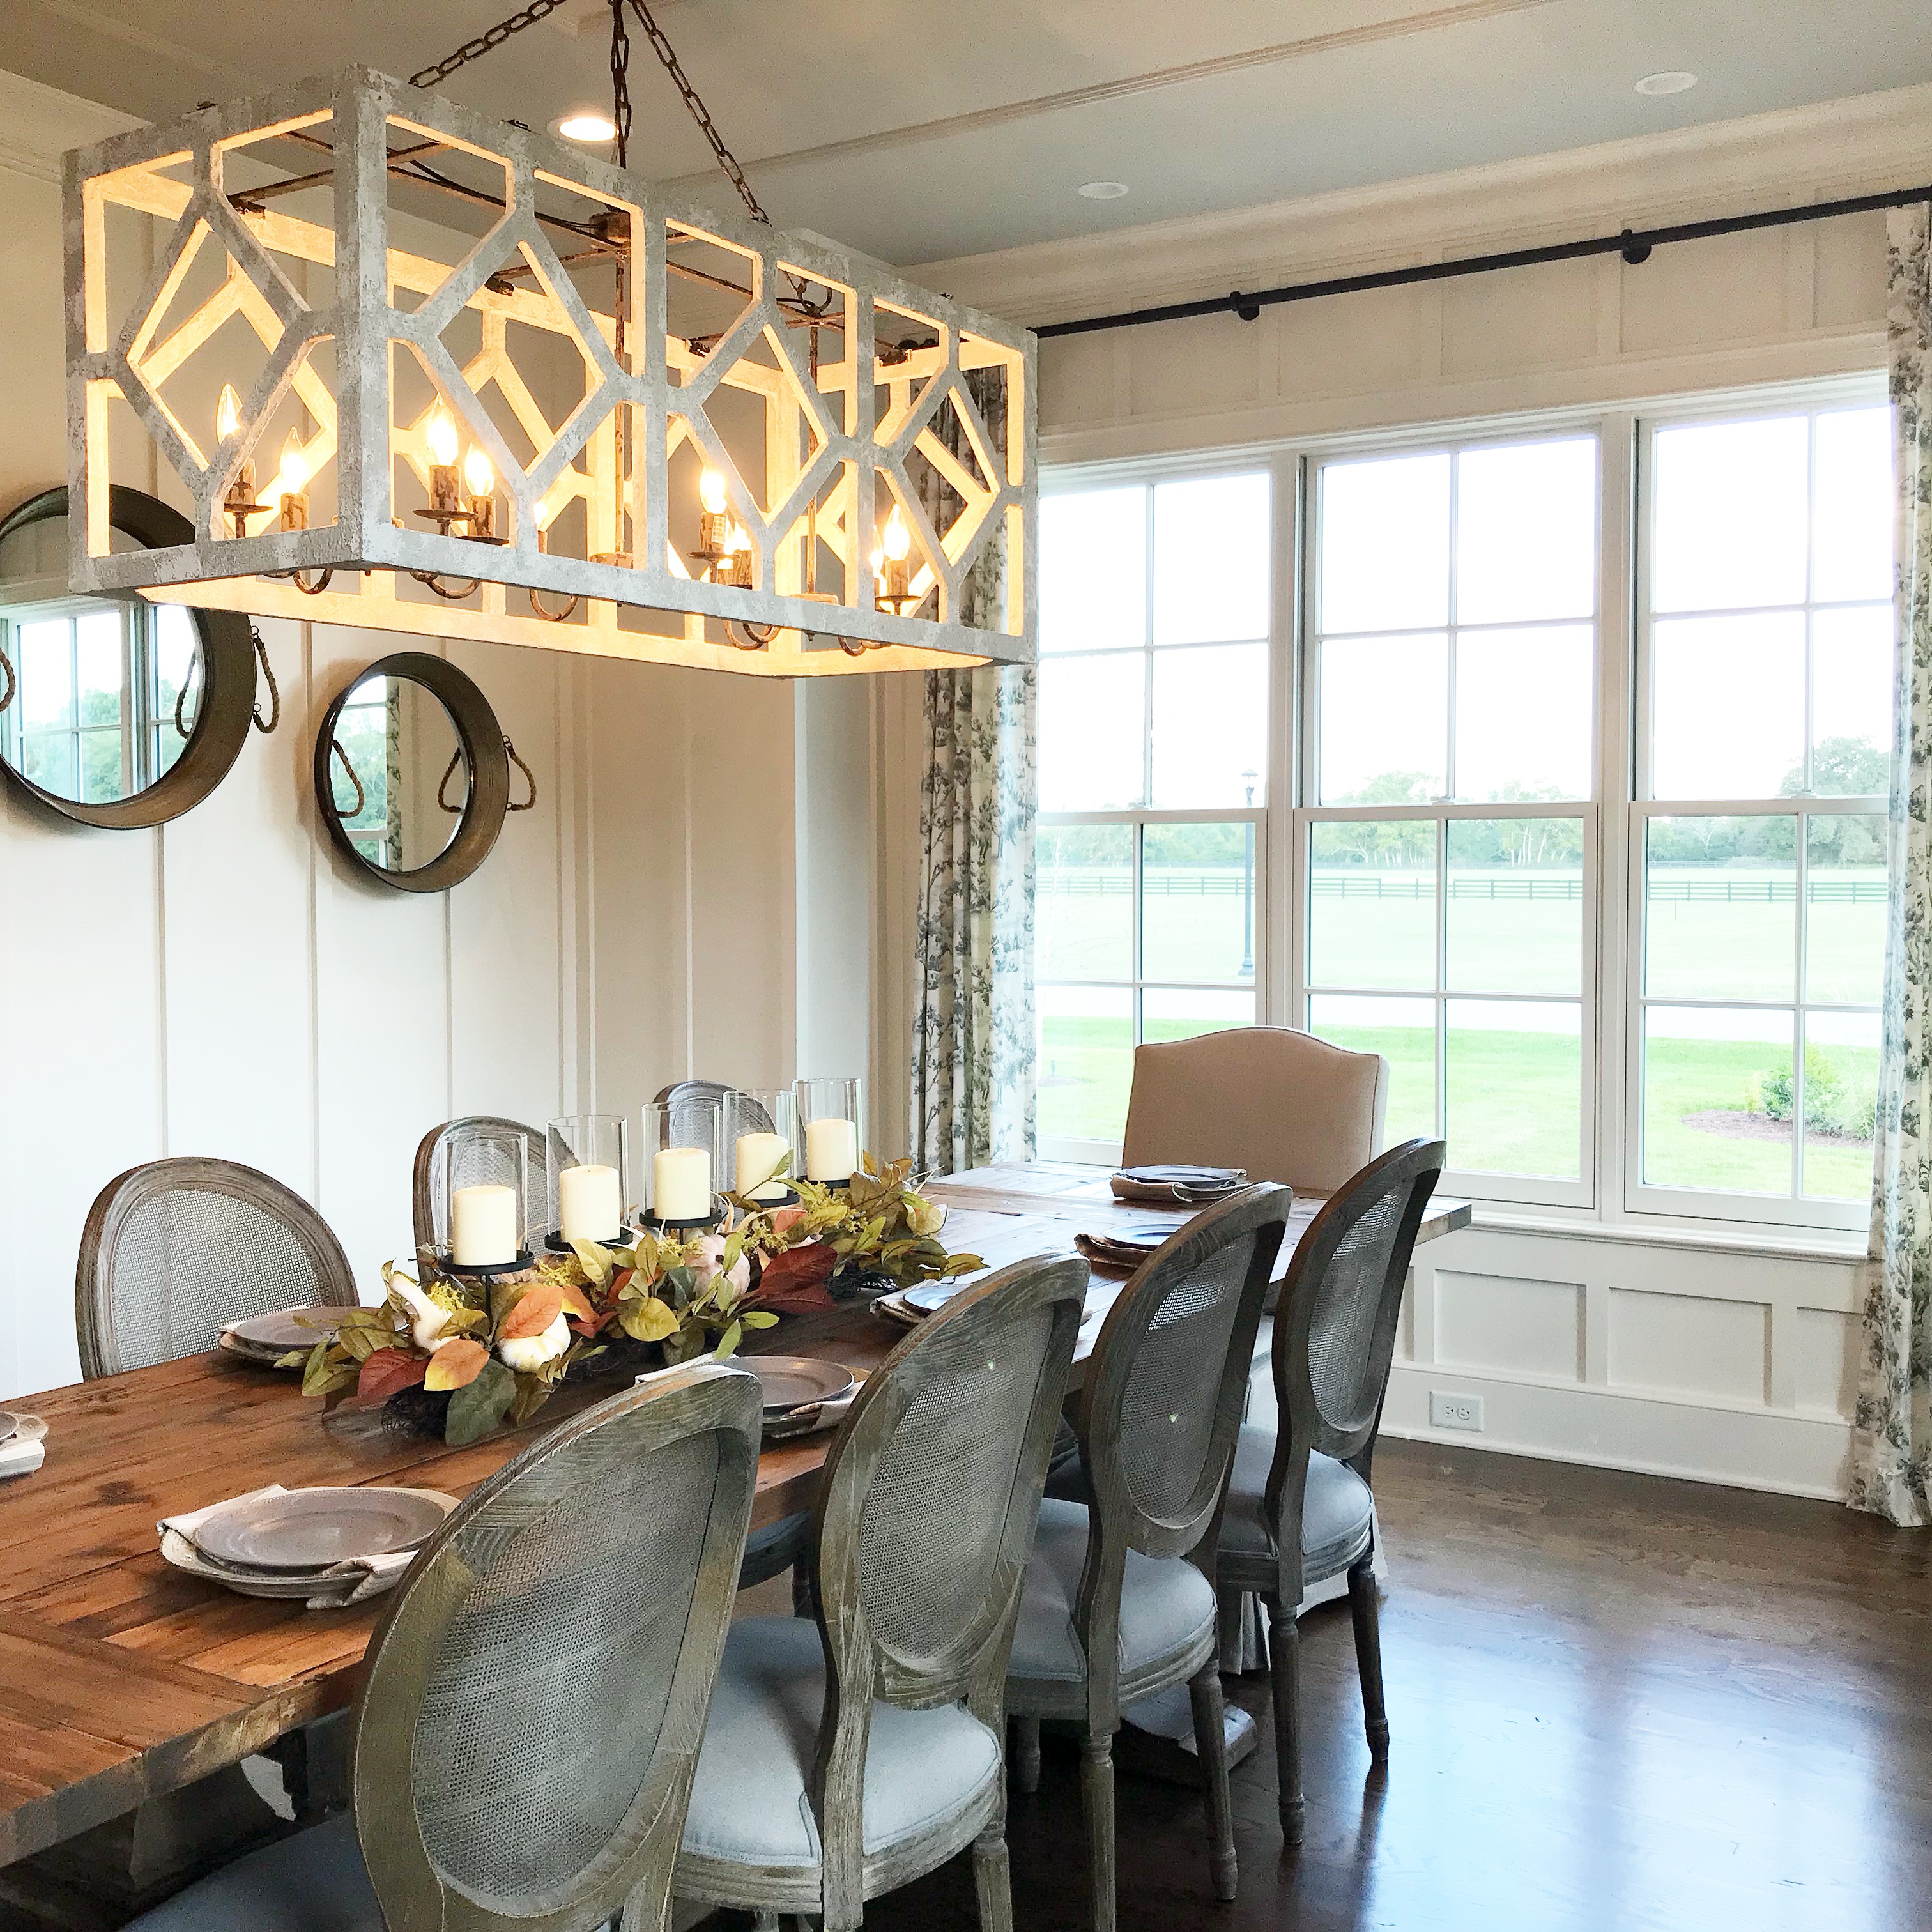 Decorating Ideas For A Dining Room Vintage Dining Room Decorating Ideas